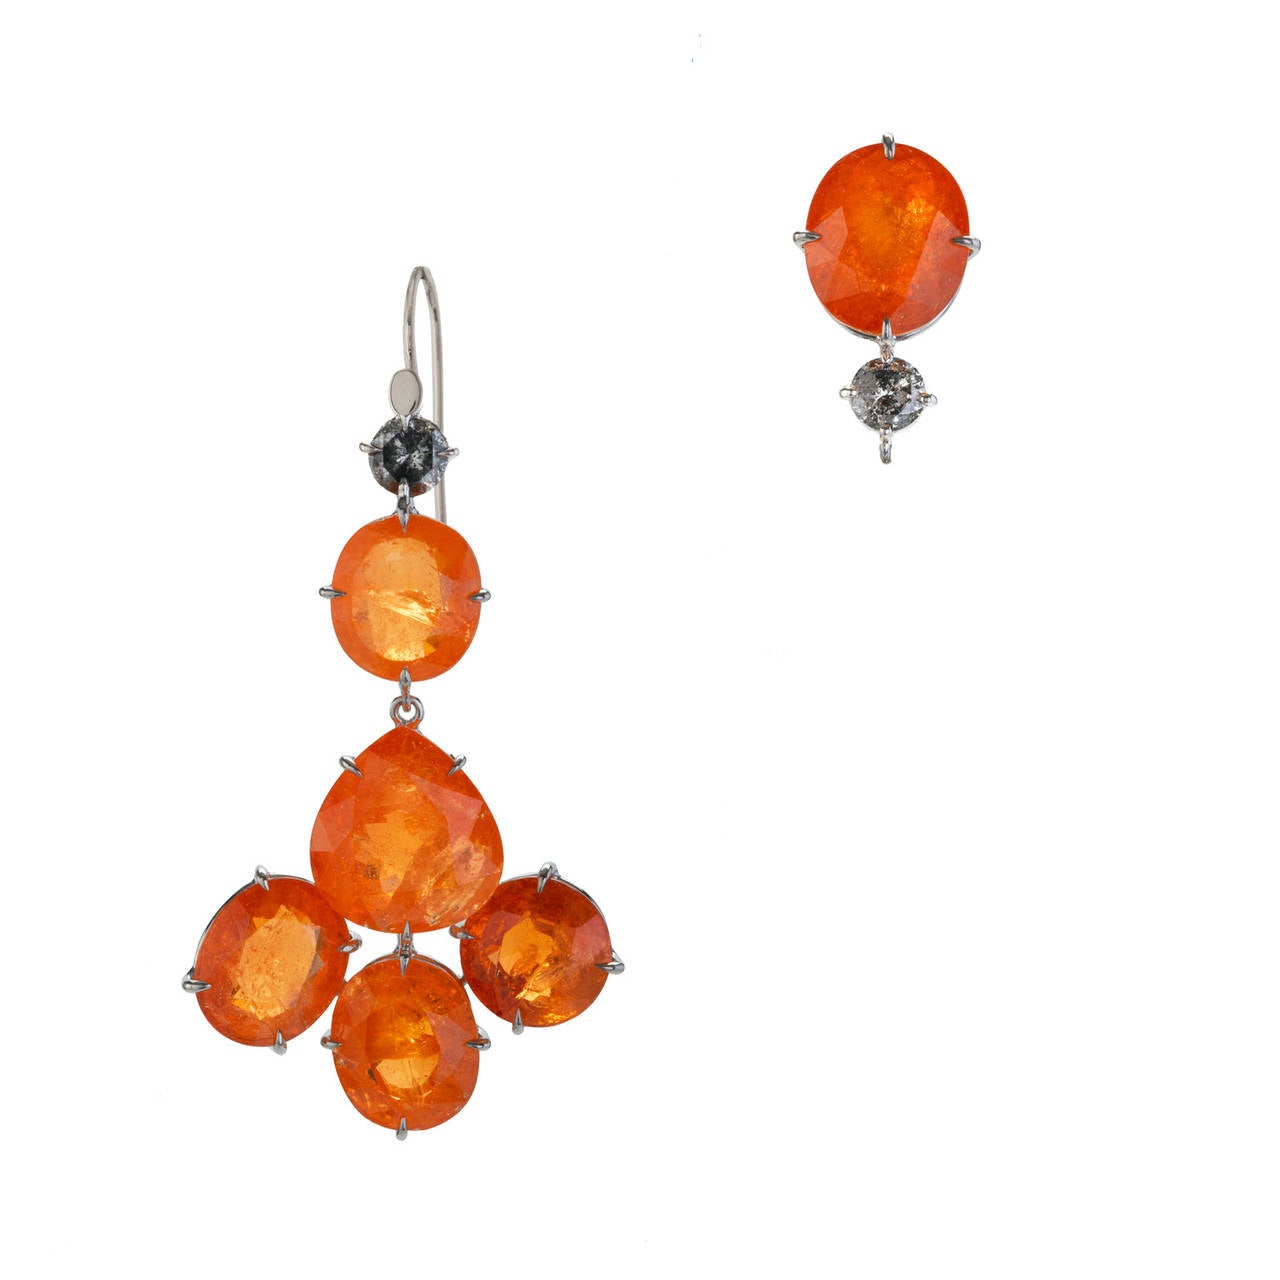 The wonderful color of these large earrings is natural mandarin garnet. This intense orange colored garnet was first discovered in Africa in 1991 and has been sought after by collectors ever since. Although based on Indian designs and recalling the